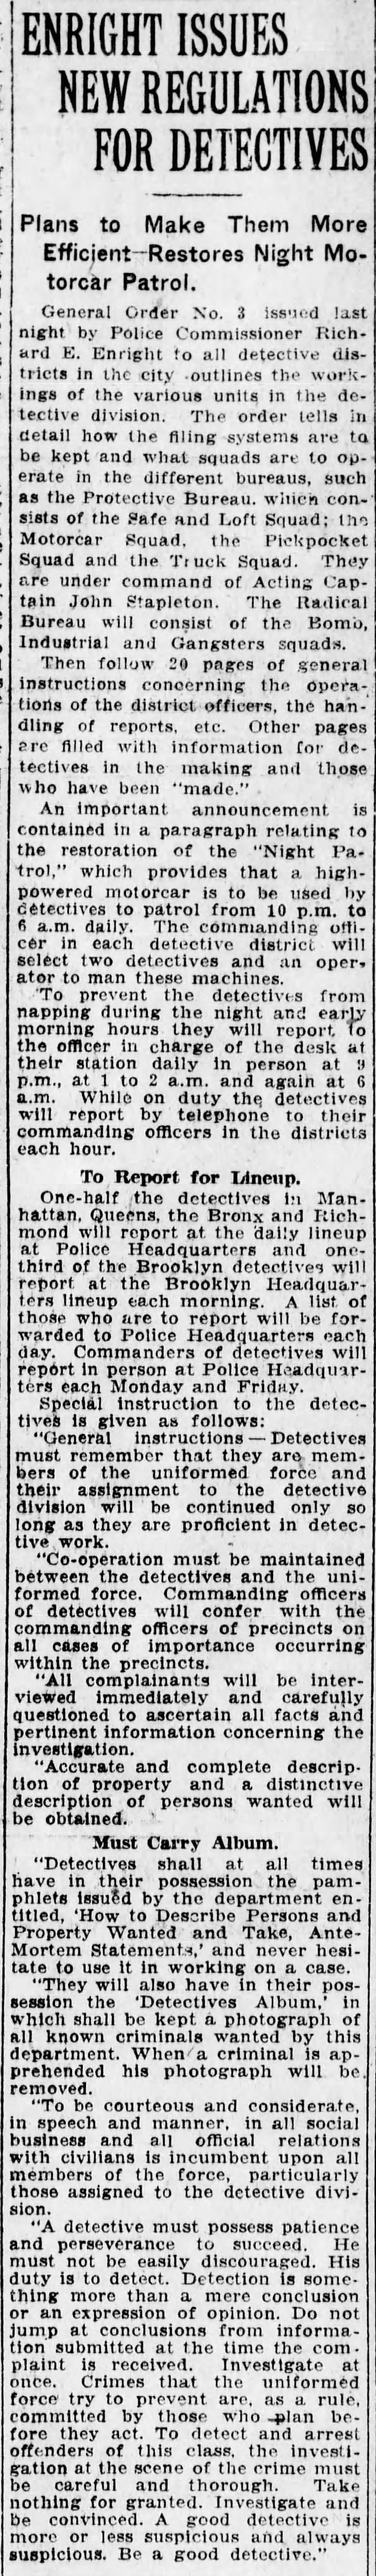 New York detectives rules 1924